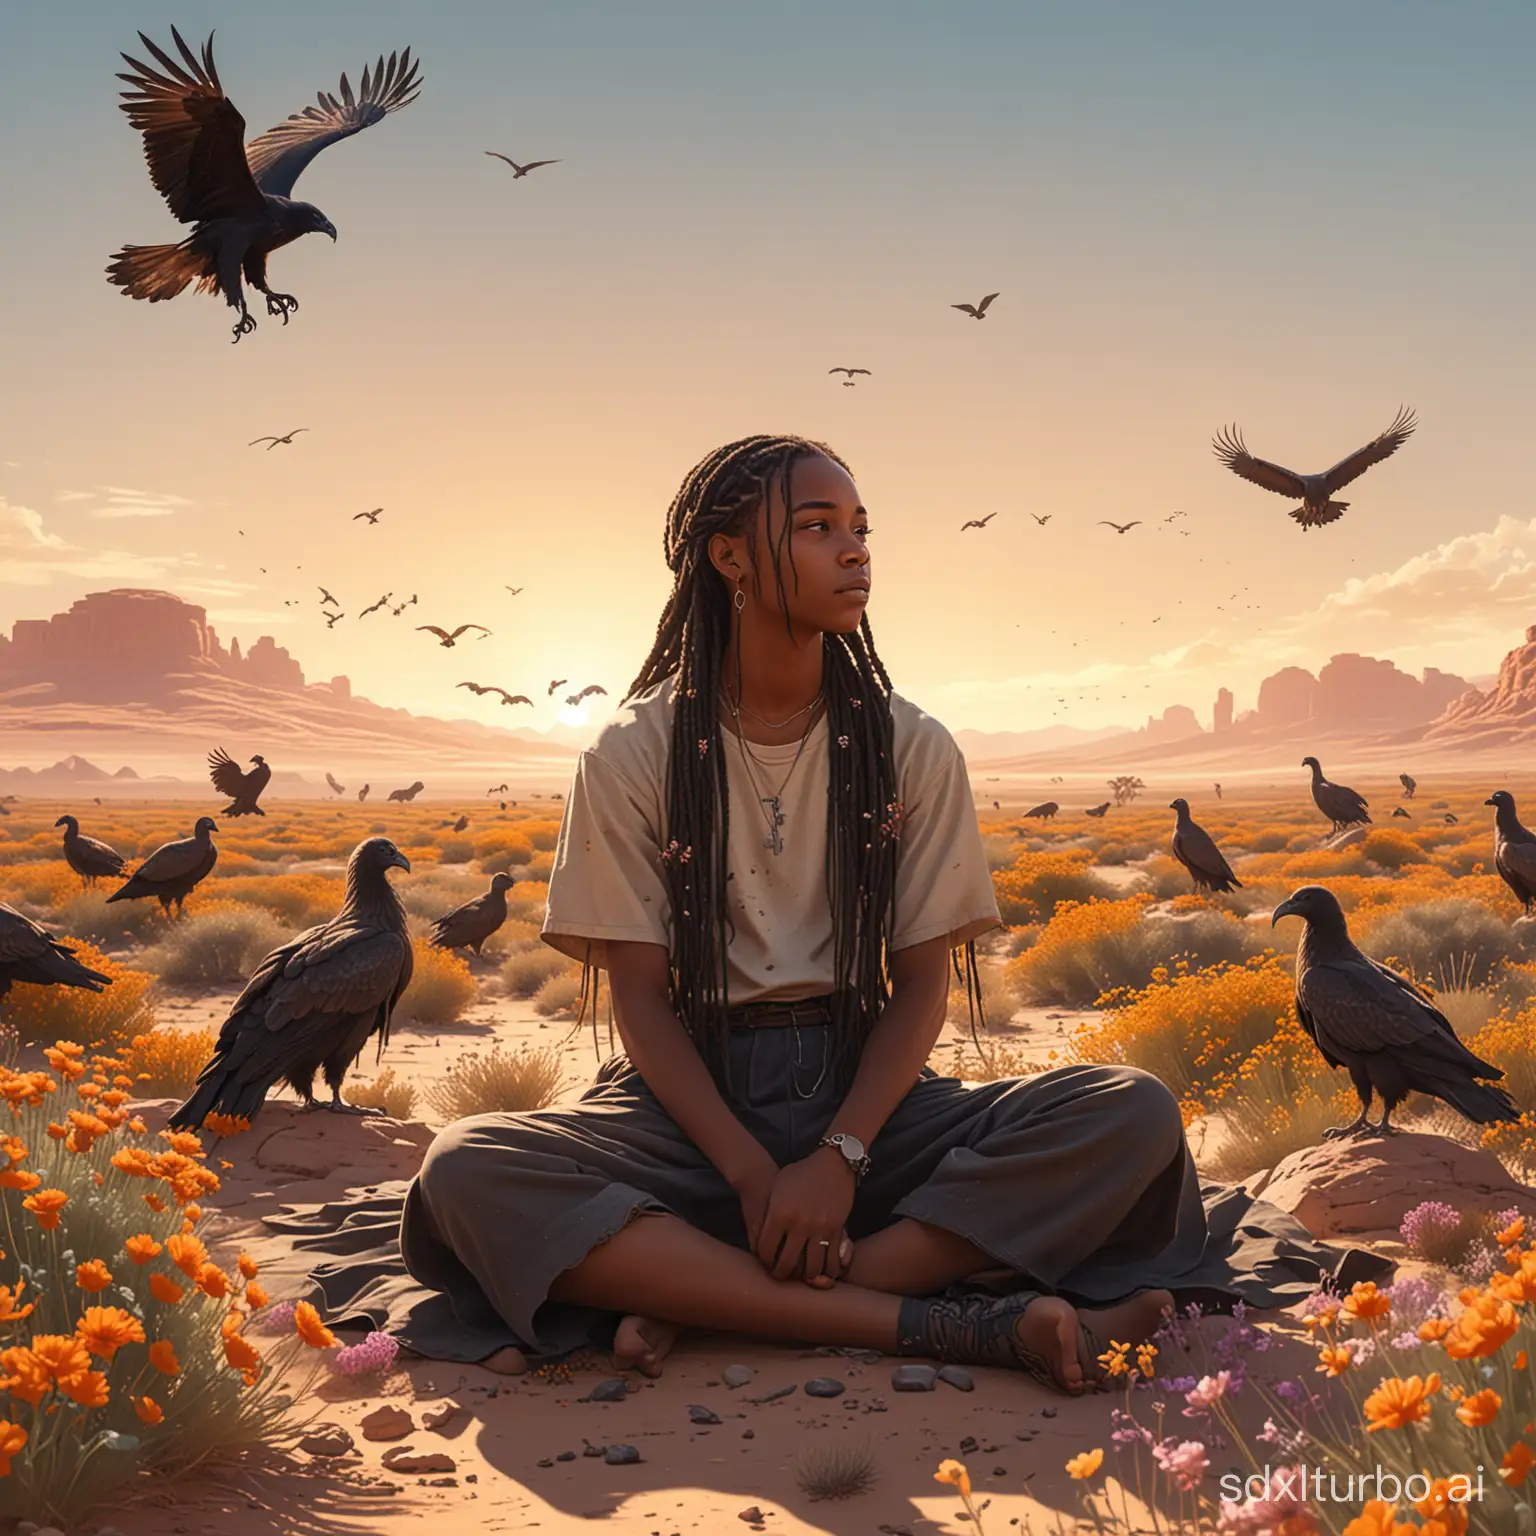 Full body portrait of a black teen with long braids, sitting on a patch of grass and flowers in the middle of a desert, vultures circling in a clear sky, very sunny, warm colors, concept art